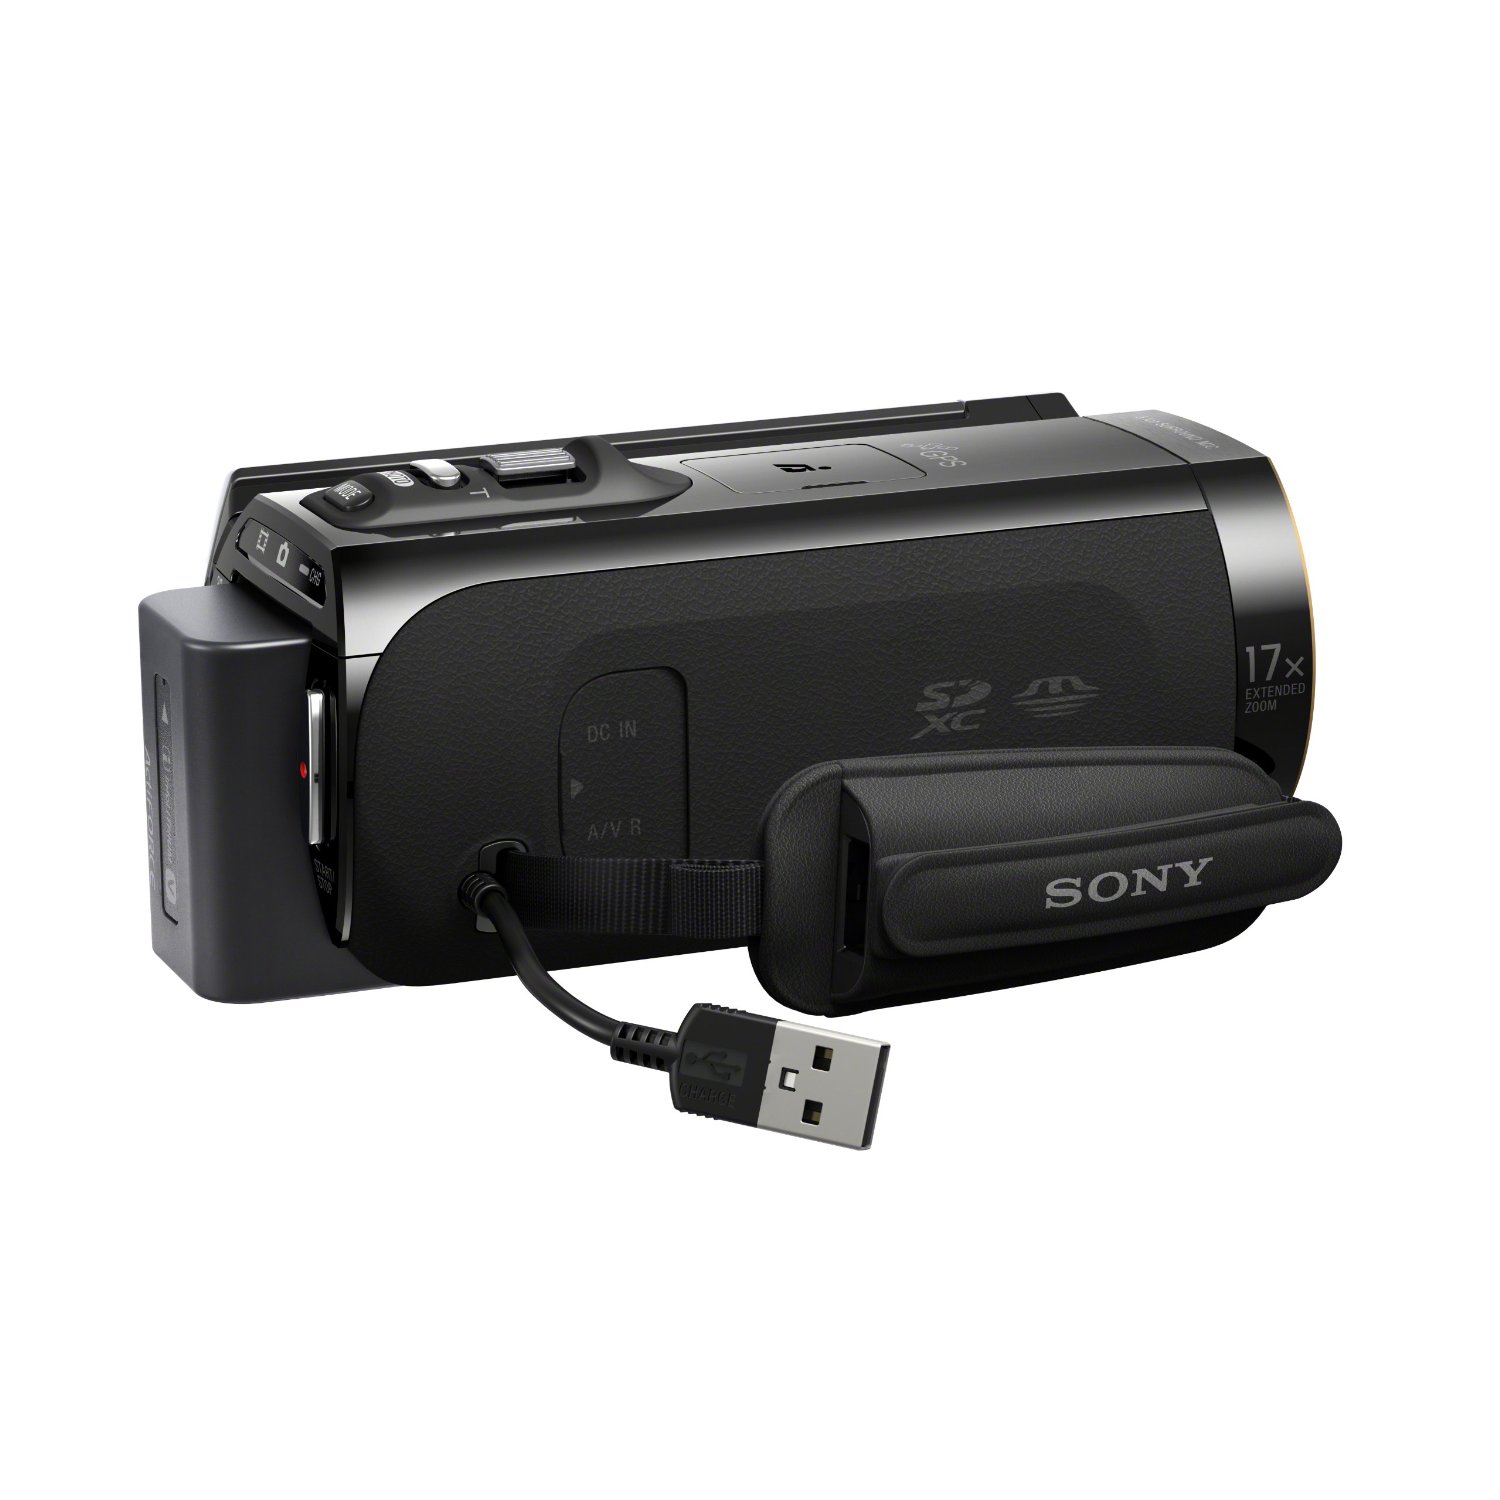 http://thetechjournal.com/wp-content/uploads/images/1203/1333213211-sony-hdrtd20v-hd-handycam-204-mp-3d-camcorder-10.jpg